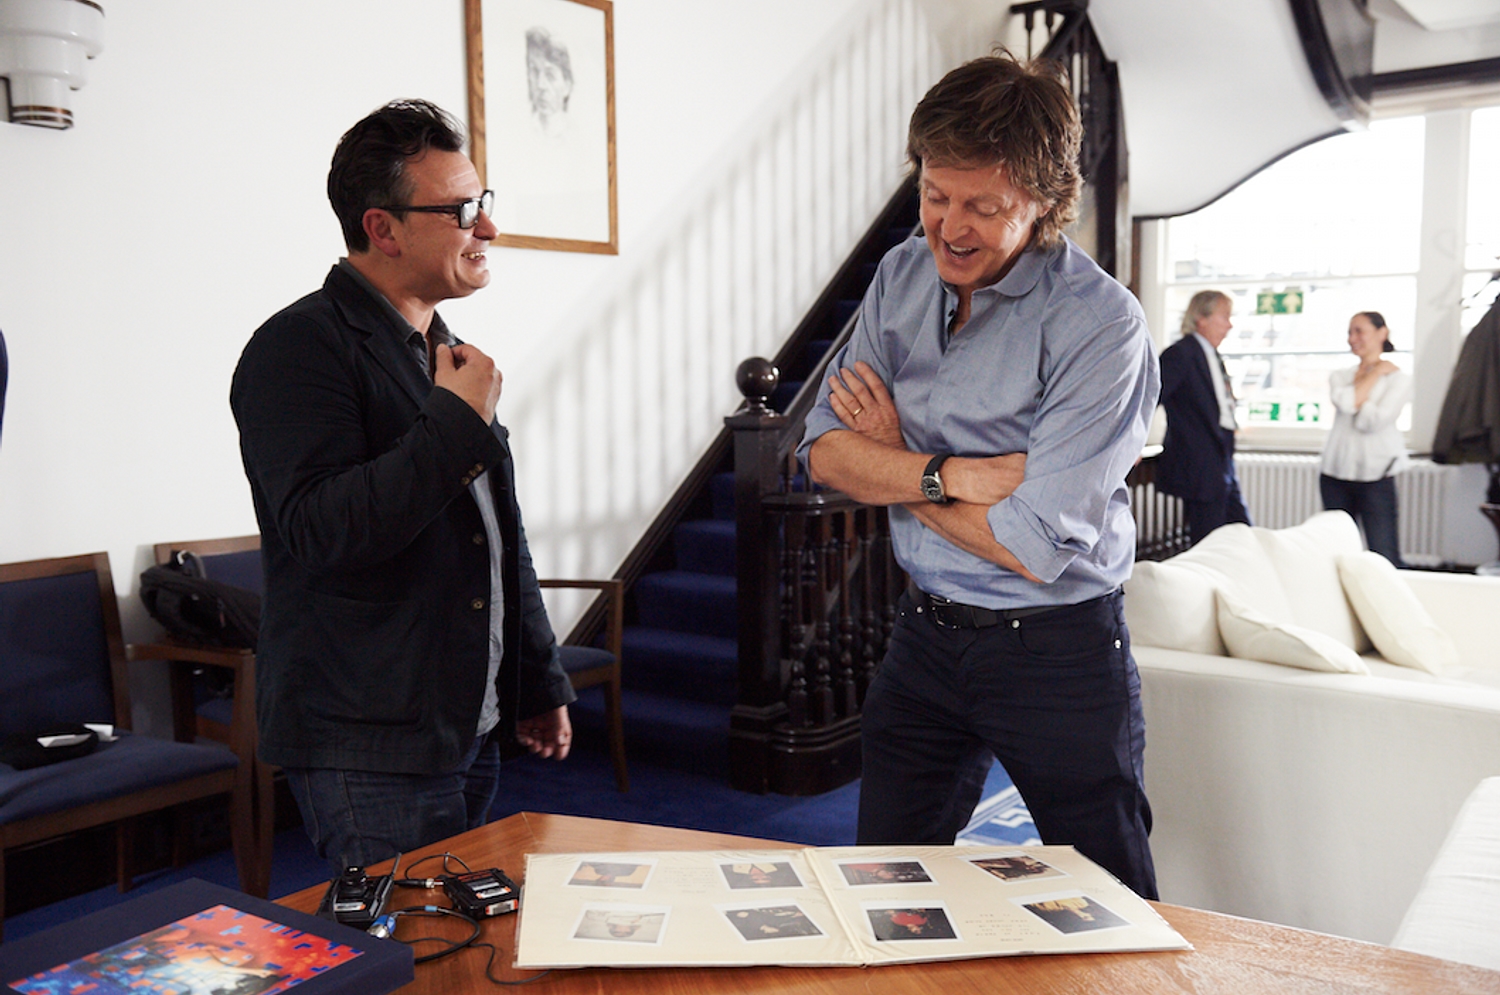 Sir Paul McCartney talks 1983 classic 'Pipes of Peace' with James Dean Bradfield